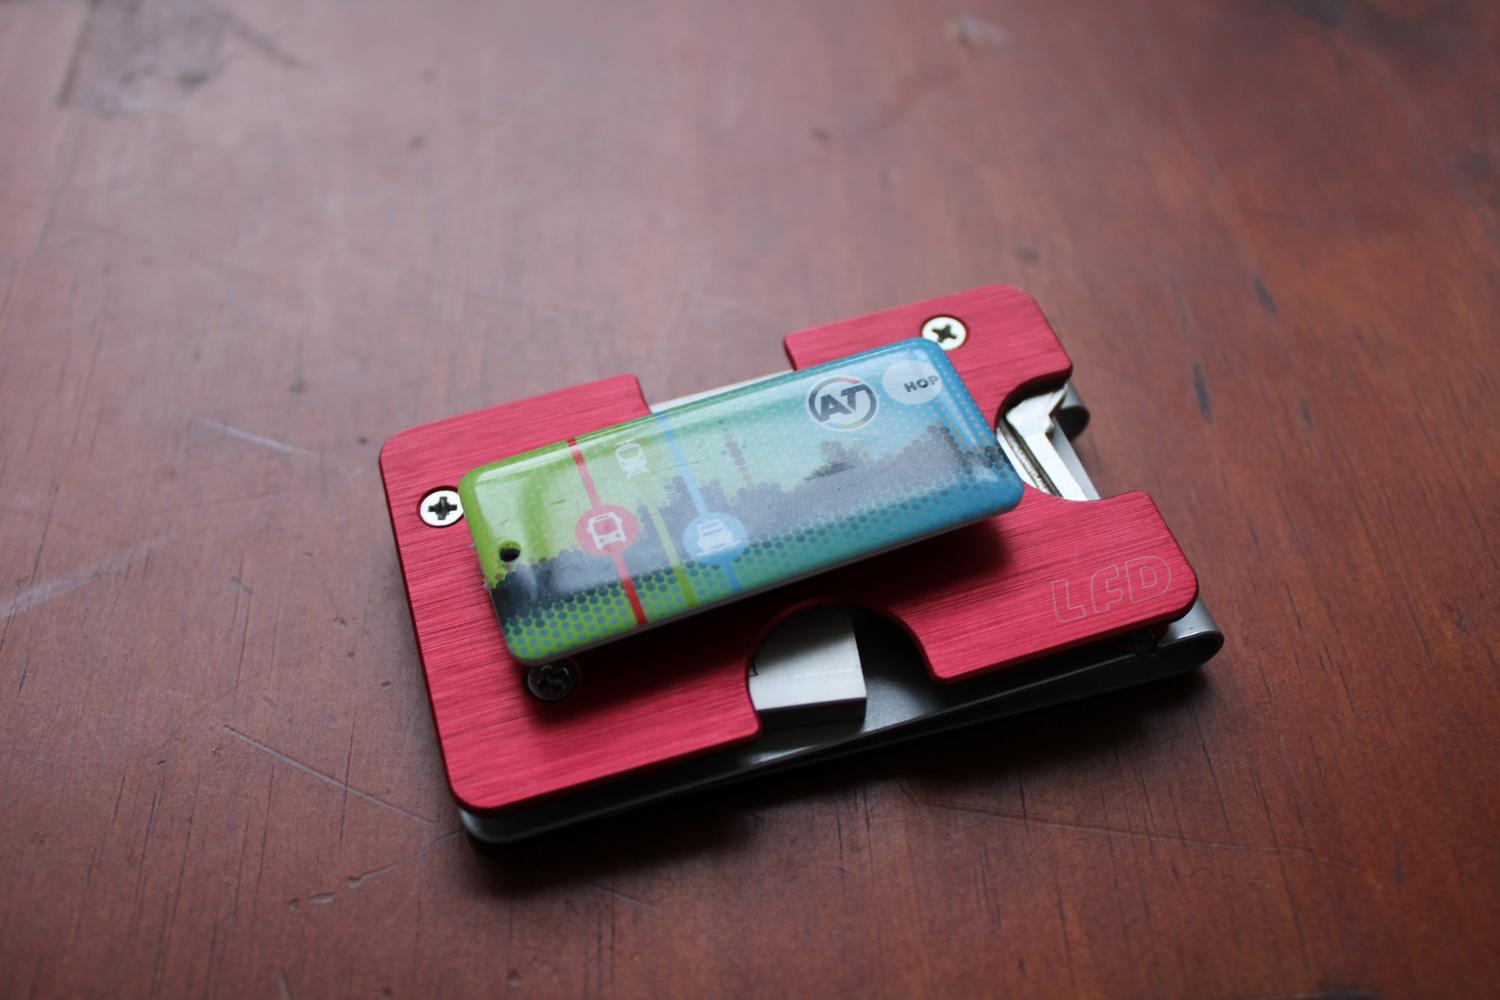 An aerial photo of the assembled metal wallet sitting on a table surface. It is positioned right side up this time showing the red top plate. On top of the red plate is the small badge sized transit card, seemingly hovering in place. It's actually attached to a velcro strip although you can't visually tell that from the photo.